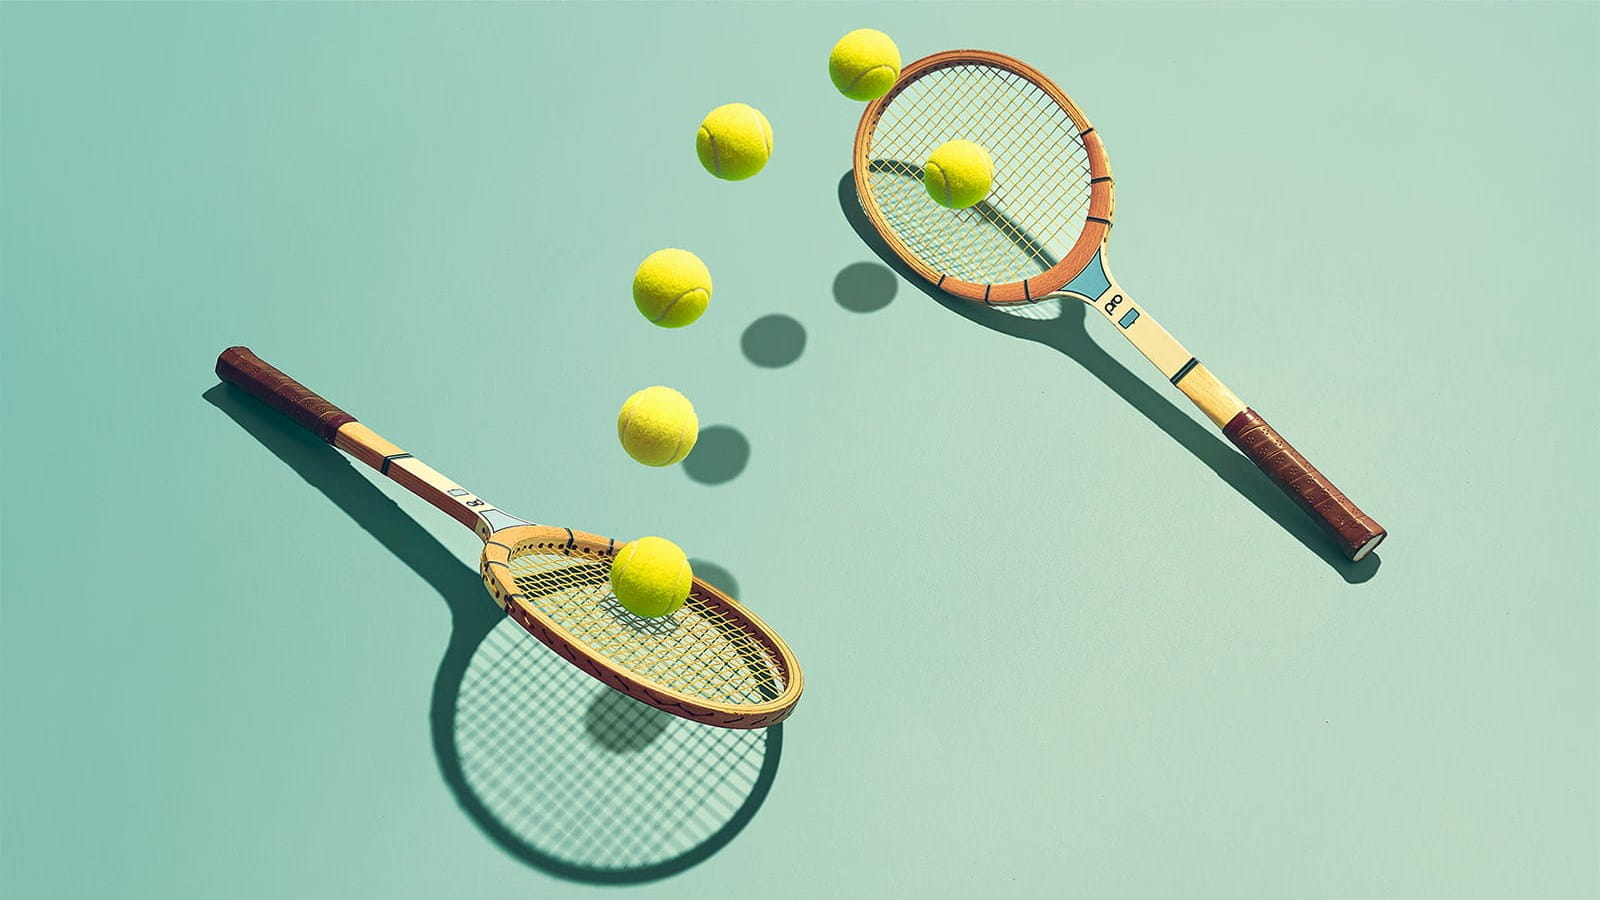 two tennis rackets laying on ground hitting multiple yellow tennis balls between each other teal background